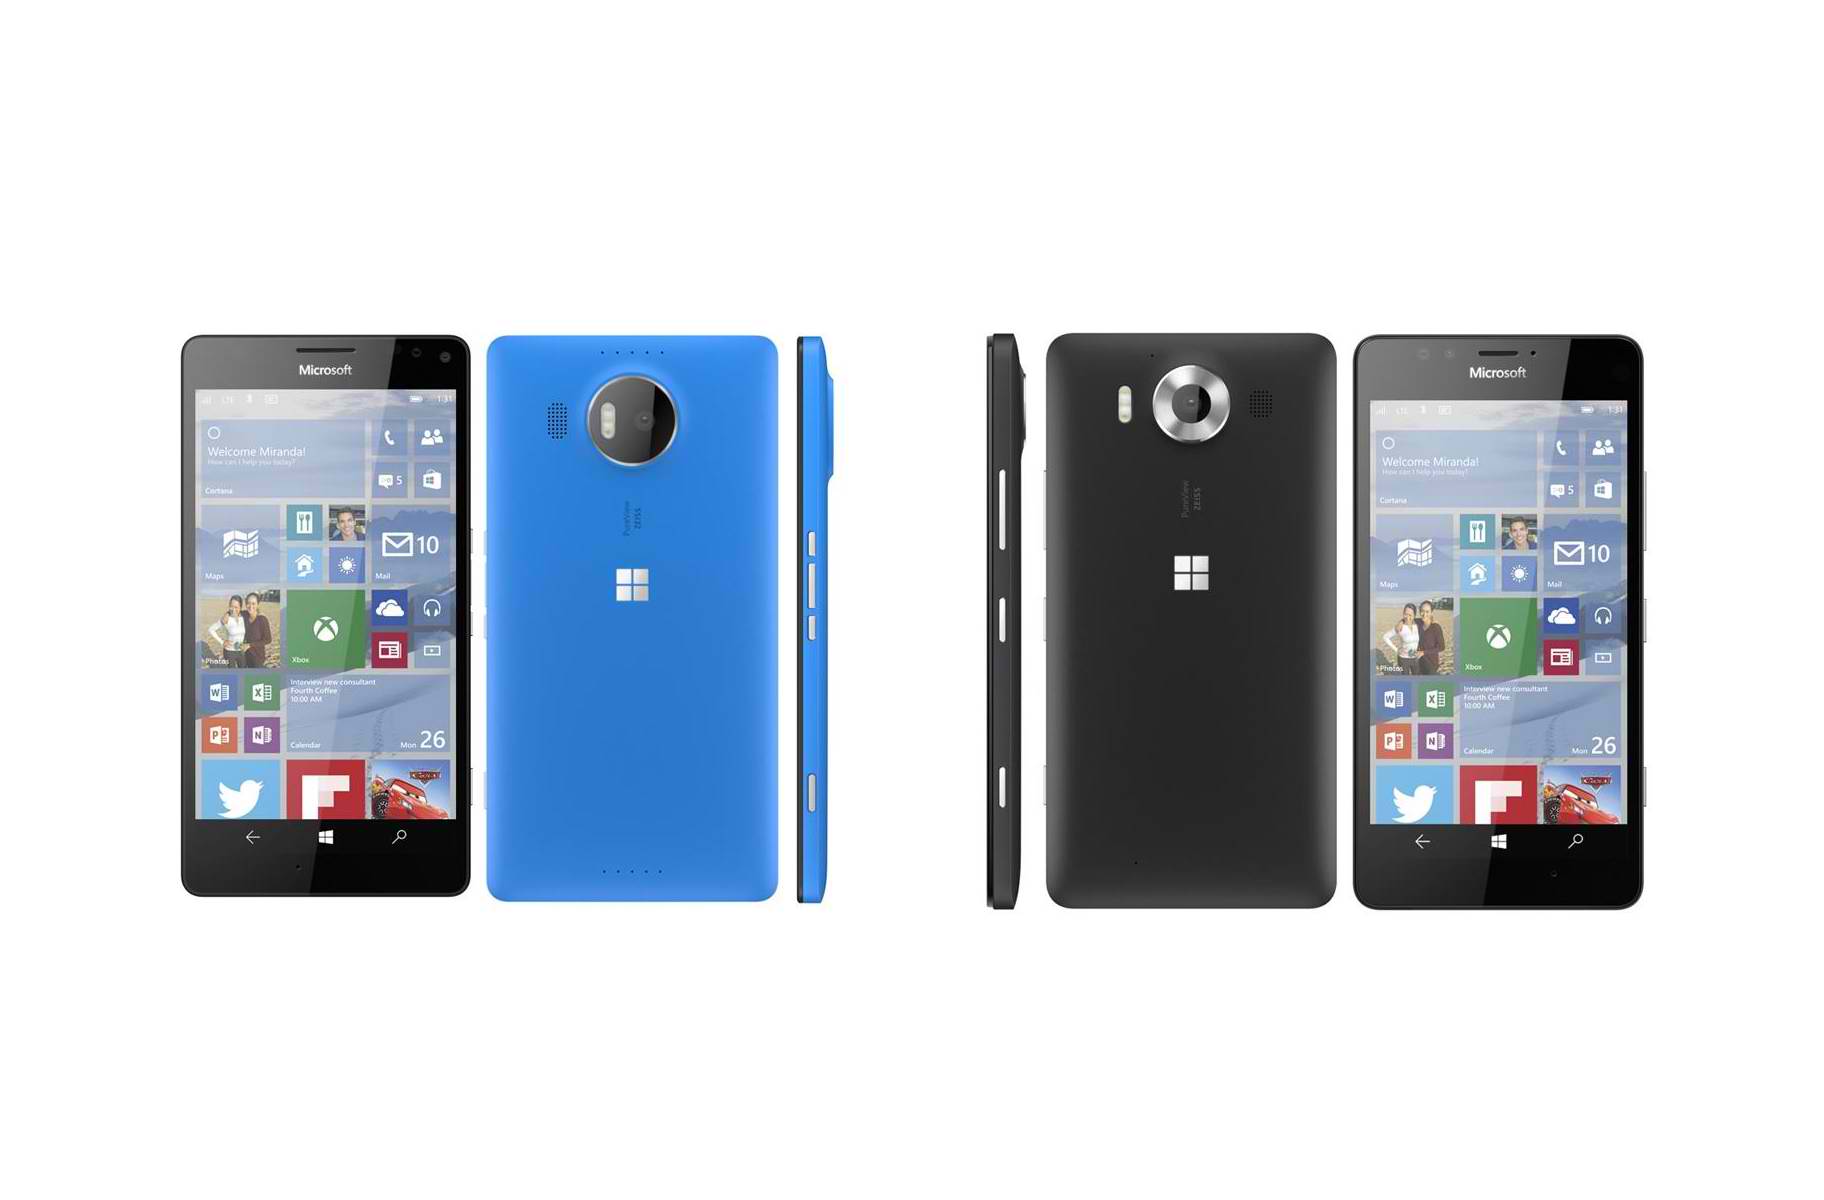 Microsoft is preparing for a big event next month where it expected to unveil its much anticipated 2015 flagships, the Lumia 950 and Lumia 950 XL.  A few weeks before the rumored launch, new reports now suggest that the devices will be placed at roughly the same price point as the iPhones 6s. A Spanish online retailer revealed that the Lumia 950 will cost €659 (about $738) and the larger 950 XL is priced at €749 ($838).